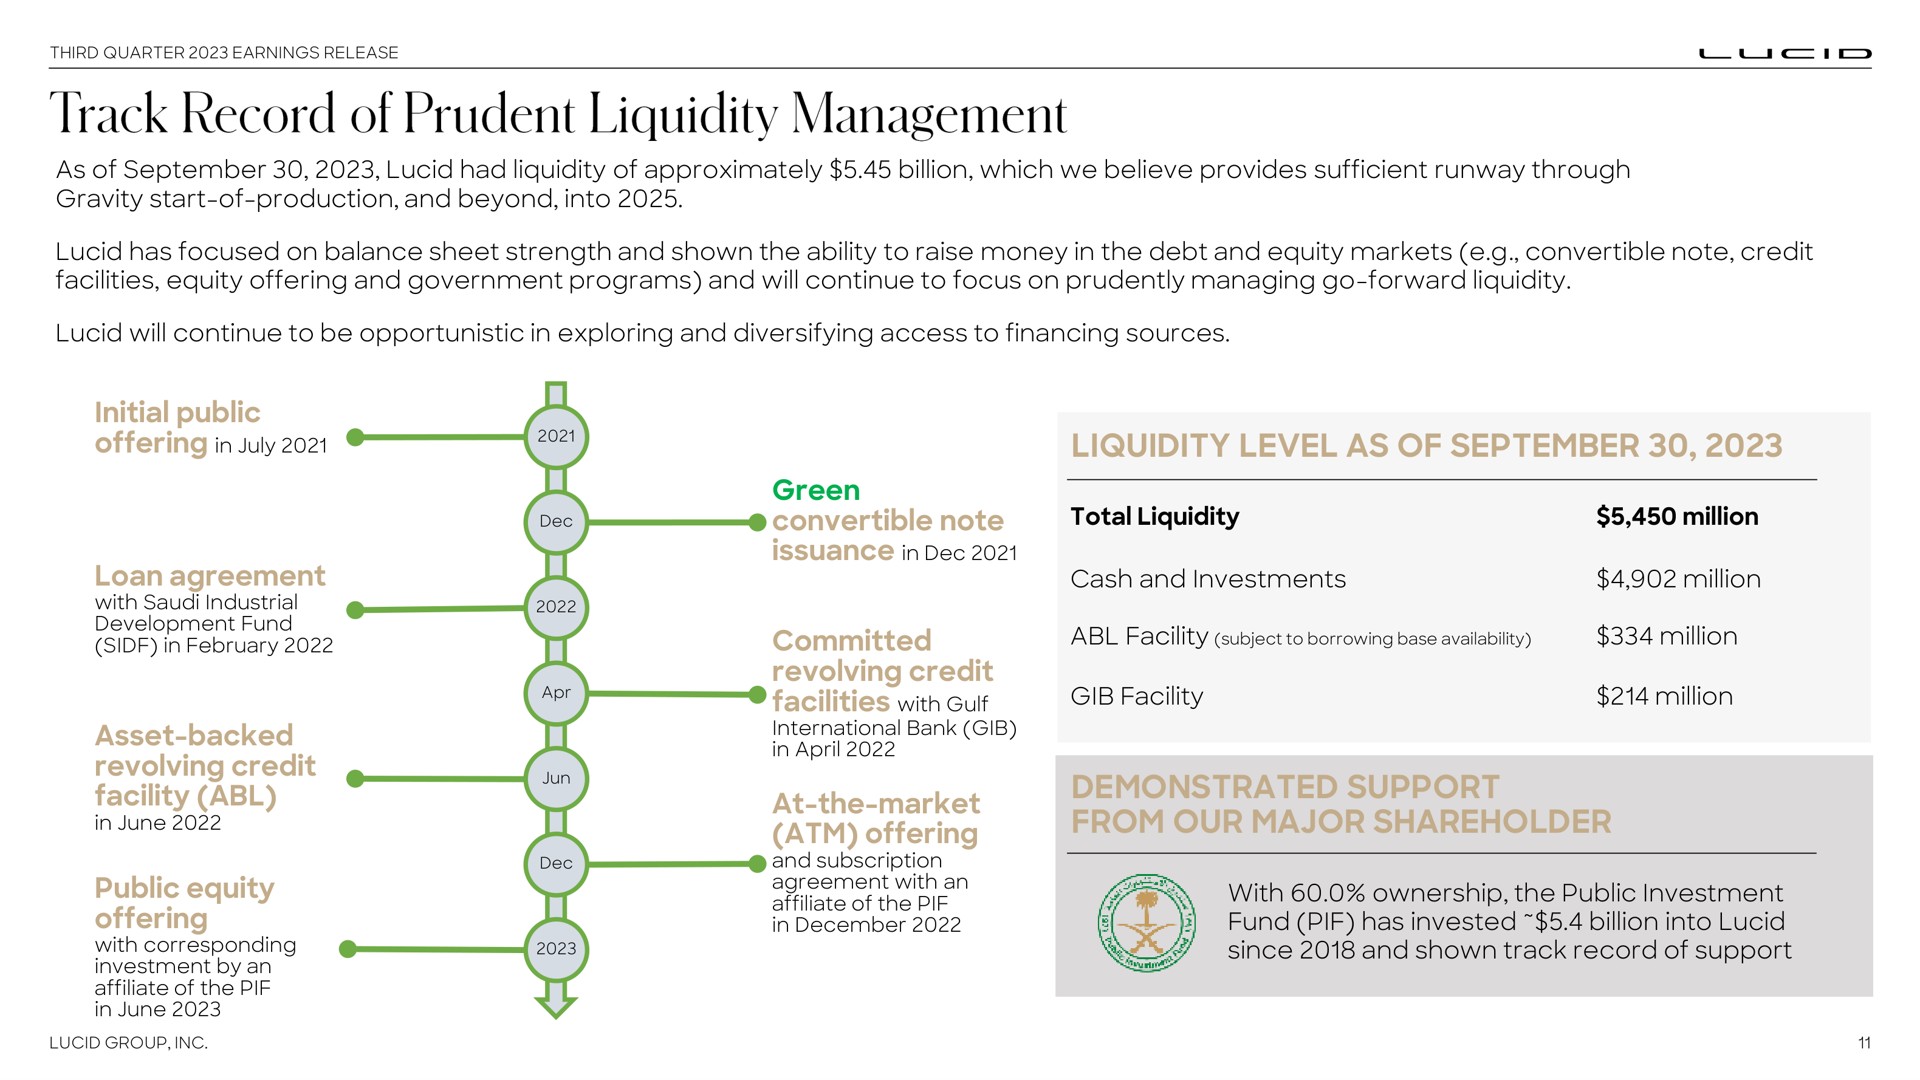 as of lucid had liquidity of approximately billion which we believe provides sufficient runway through gravity start of production and beyond into lucid has focused on balance sheet strength and shown the ability to raise money in the debt and equity markets convertible note credit facilities equity offering and government programs and will continue to focus on prudently managing go forward liquidity lucid will continue to be opportunistic in exploring and diversifying access to financing sources initial public offering in loan agreement with industrial development fund in asset backed revolving credit facility in june public equity offering with corresponding investment by an affiliate of the in june green convertible note issuance in committed revolving credit facilities with gulf international bank gib in at the market offering and subscription agreement with an affiliate of the in liquidity level as of total liquidity million cash and investments million million gib facility million demonstrated support from our major shareholder with ownership the public investment fund has invested billion into lucid since and shown track record of support prudent management | Lucid Motors